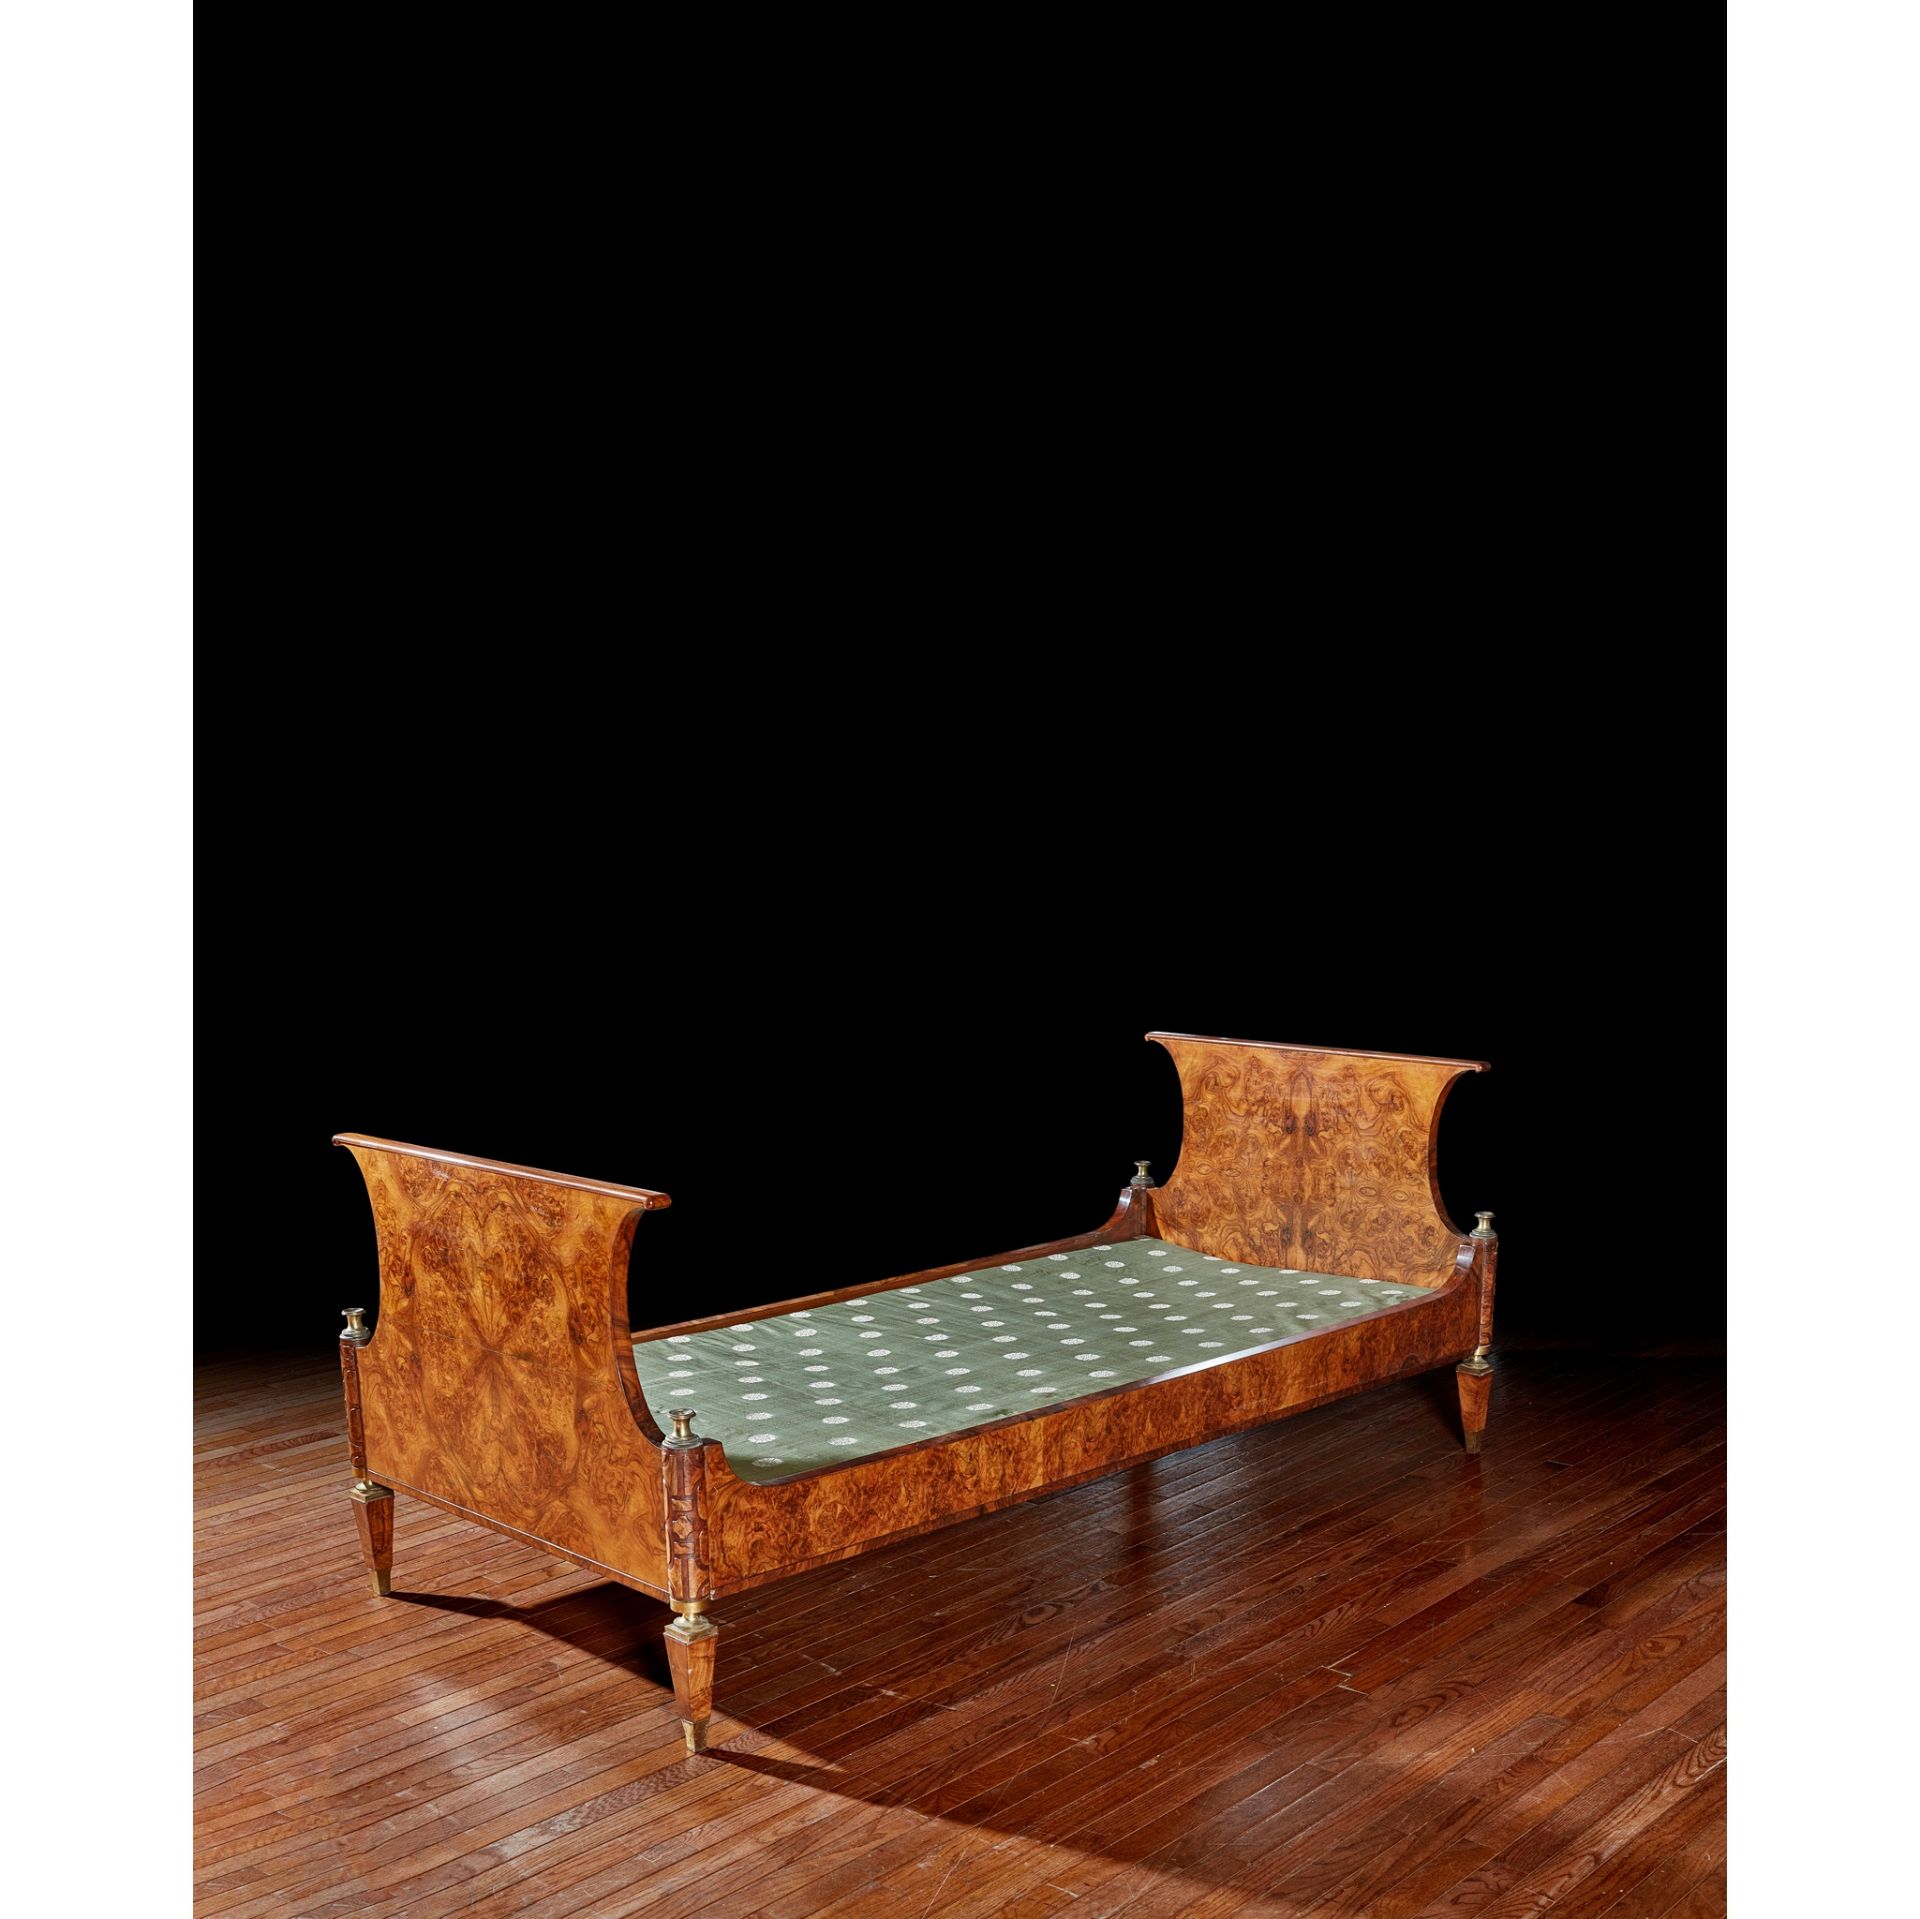 ◆ GIO PONTI (ITALIAN 1891-1979) IMPORTANT DAYBED, 1927 - Image 2 of 5